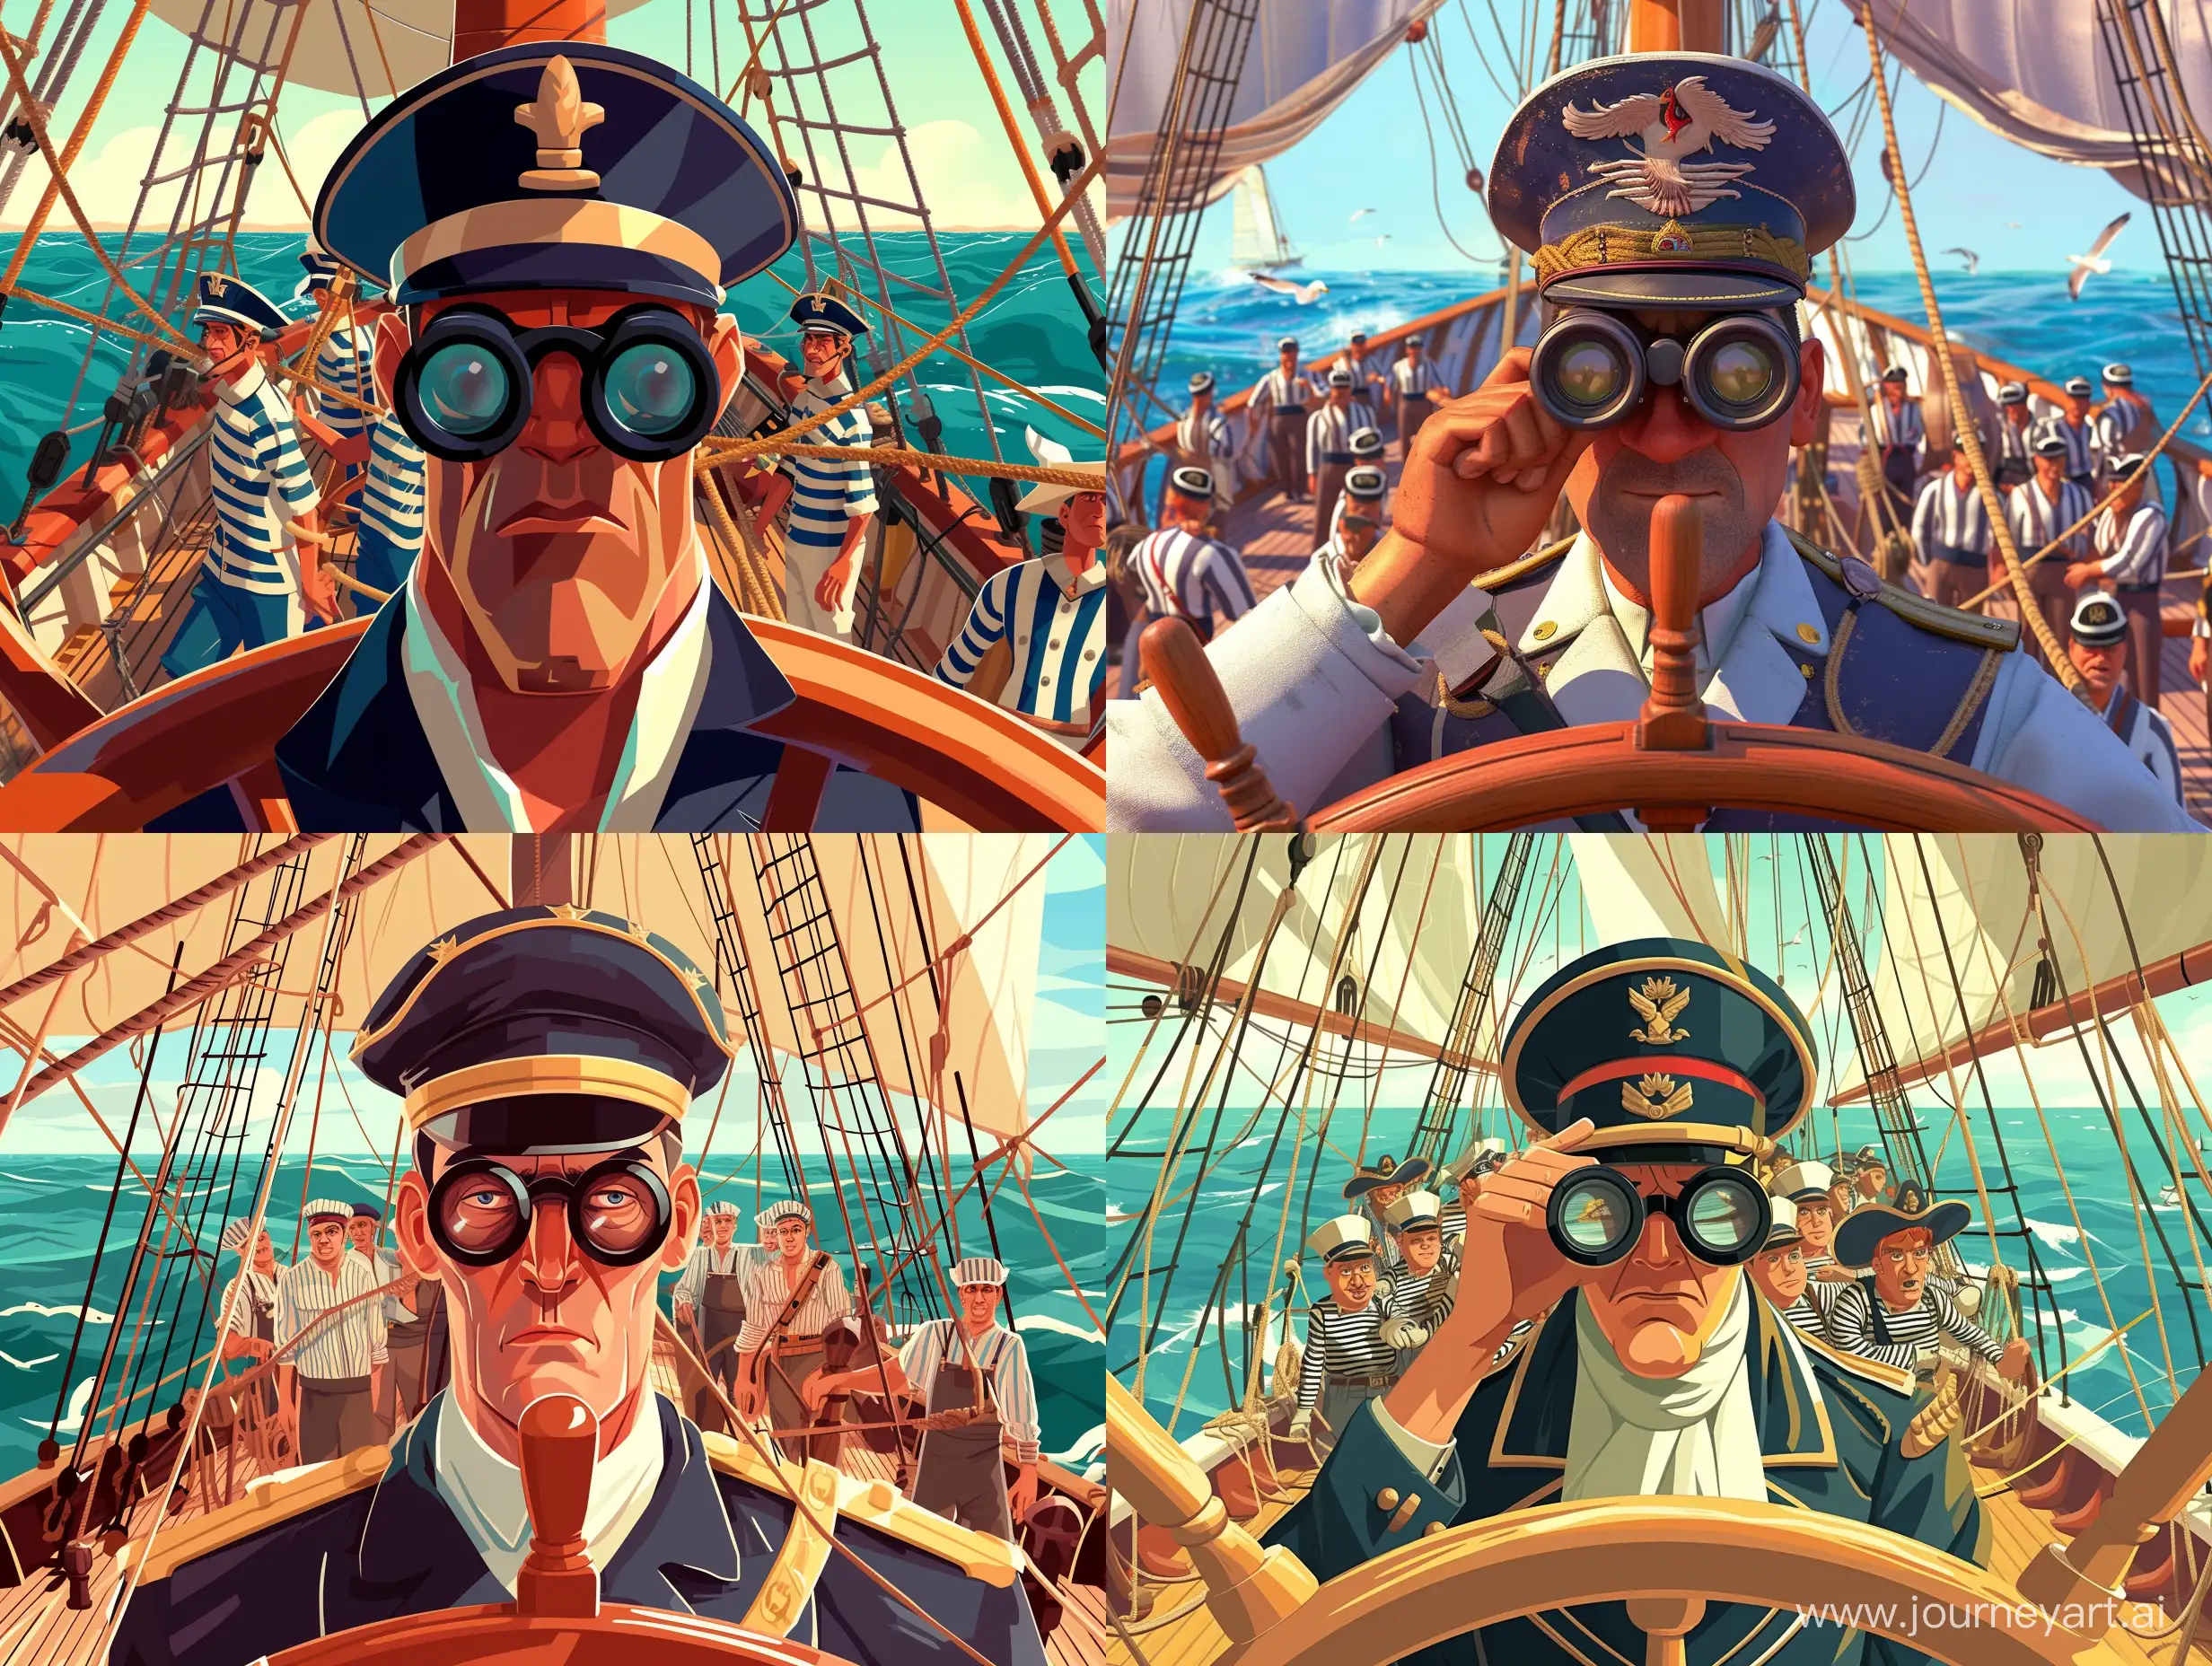 Captain-at-the-Helm-Nautical-Leadership-in-a-PixarStyle-Seascape